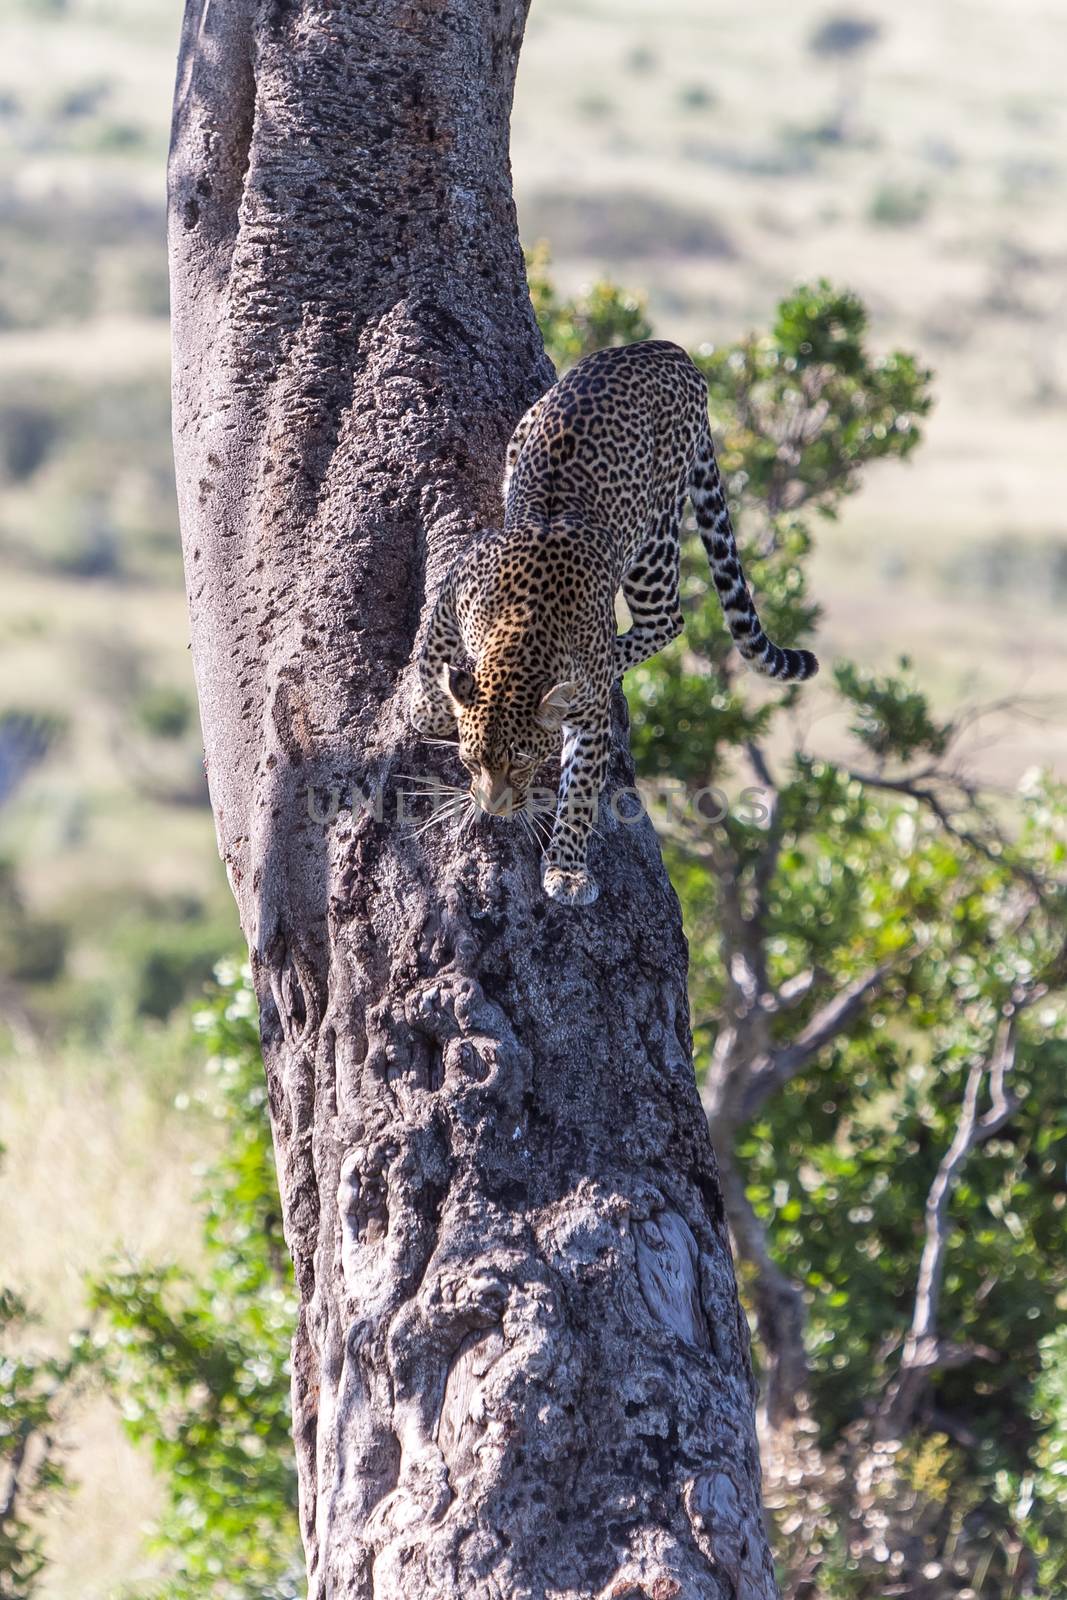 Leopard in big tree by master1305